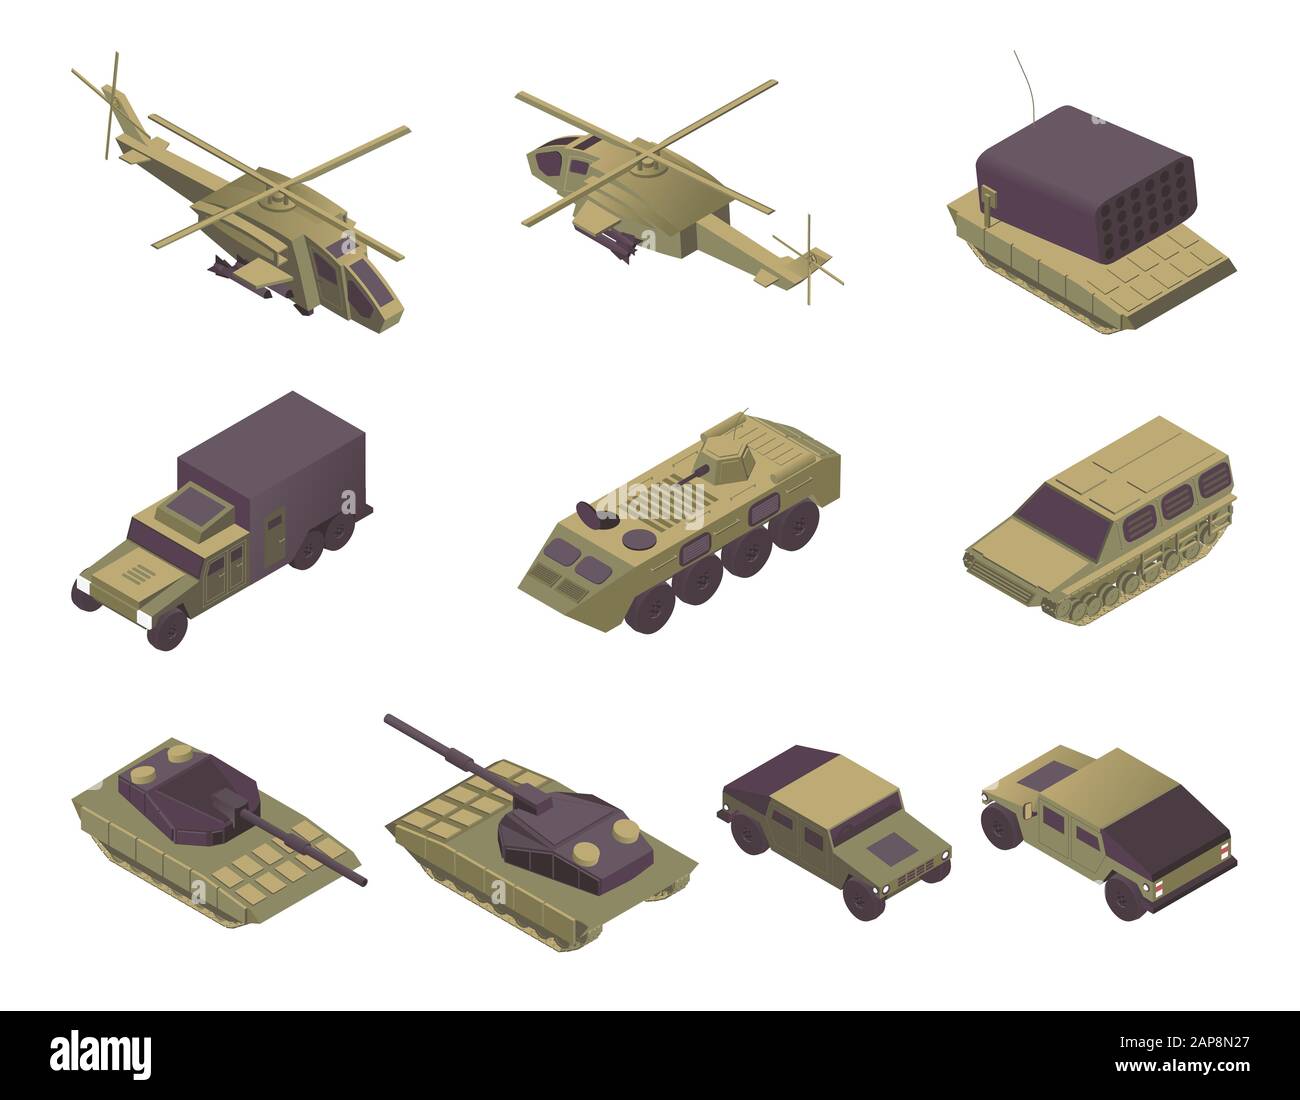 Military vehicles isometric vector illustrations set. Modern army transport, armored aircrafts, personal carriers and heavy machinery. Helicopters, APC, rocket missile launcher, truck and tanks Stock Vector